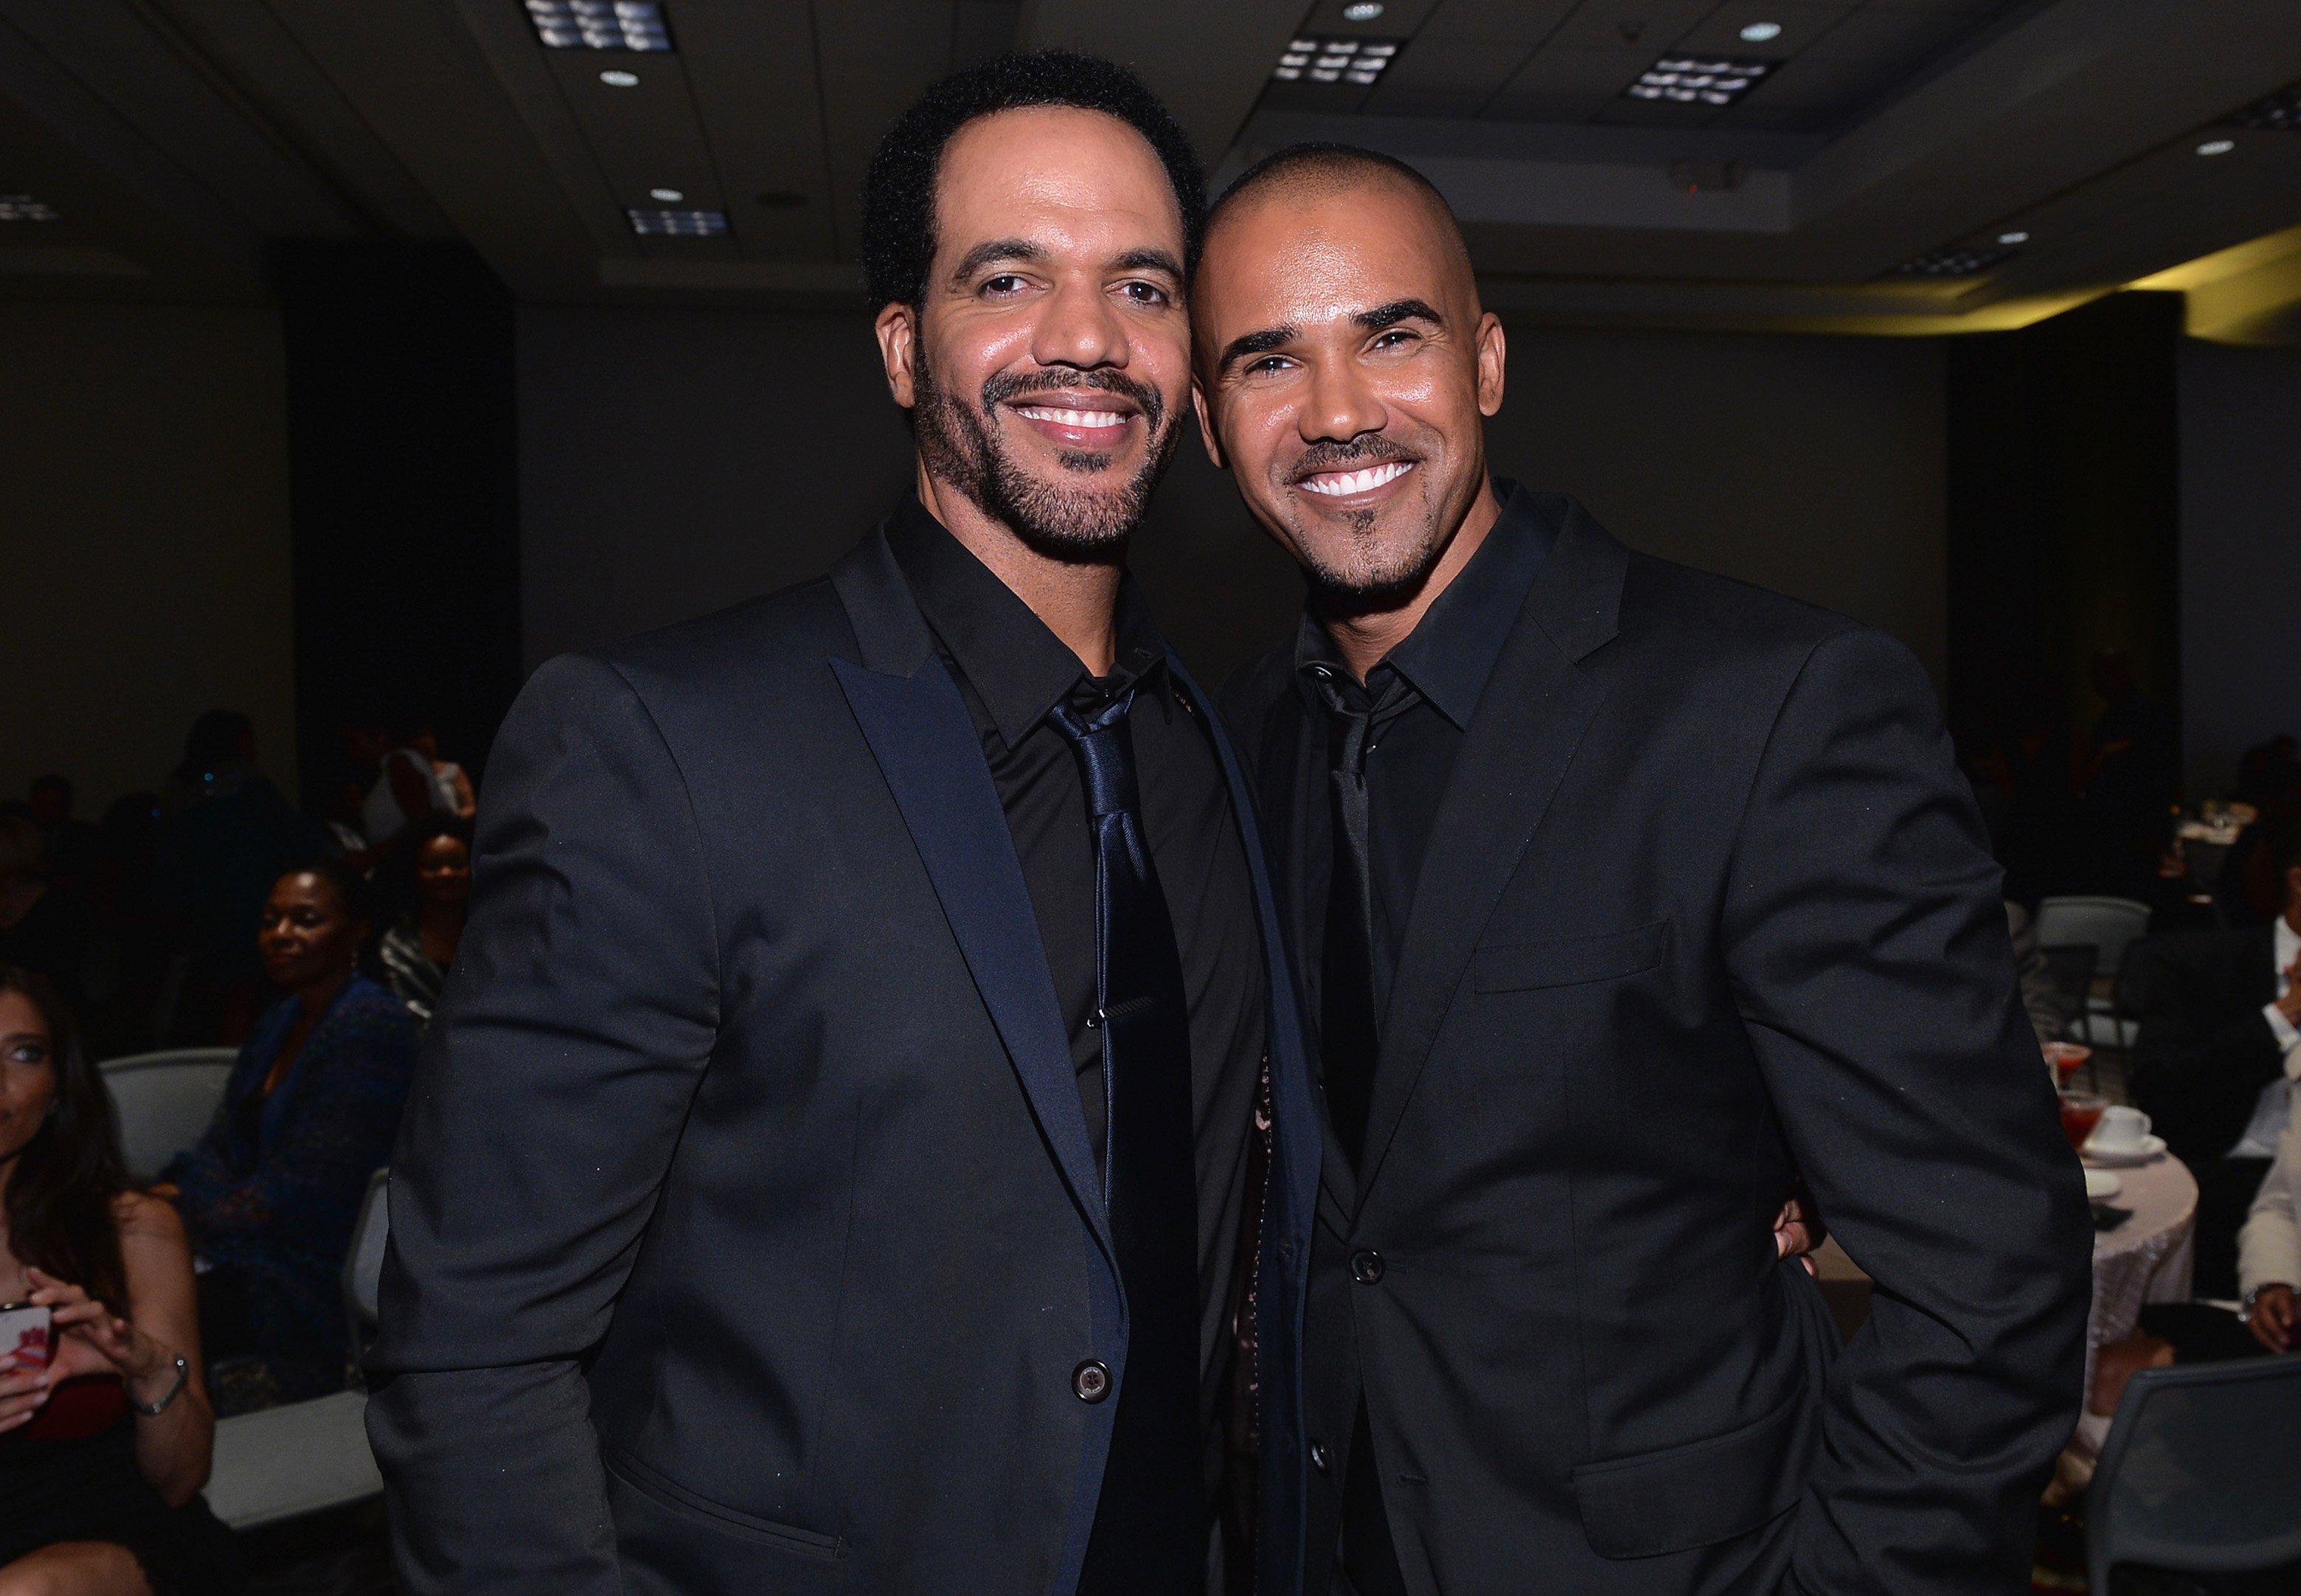 Shemar Moore and the late Kristoff St. John | Photo: Getty Images